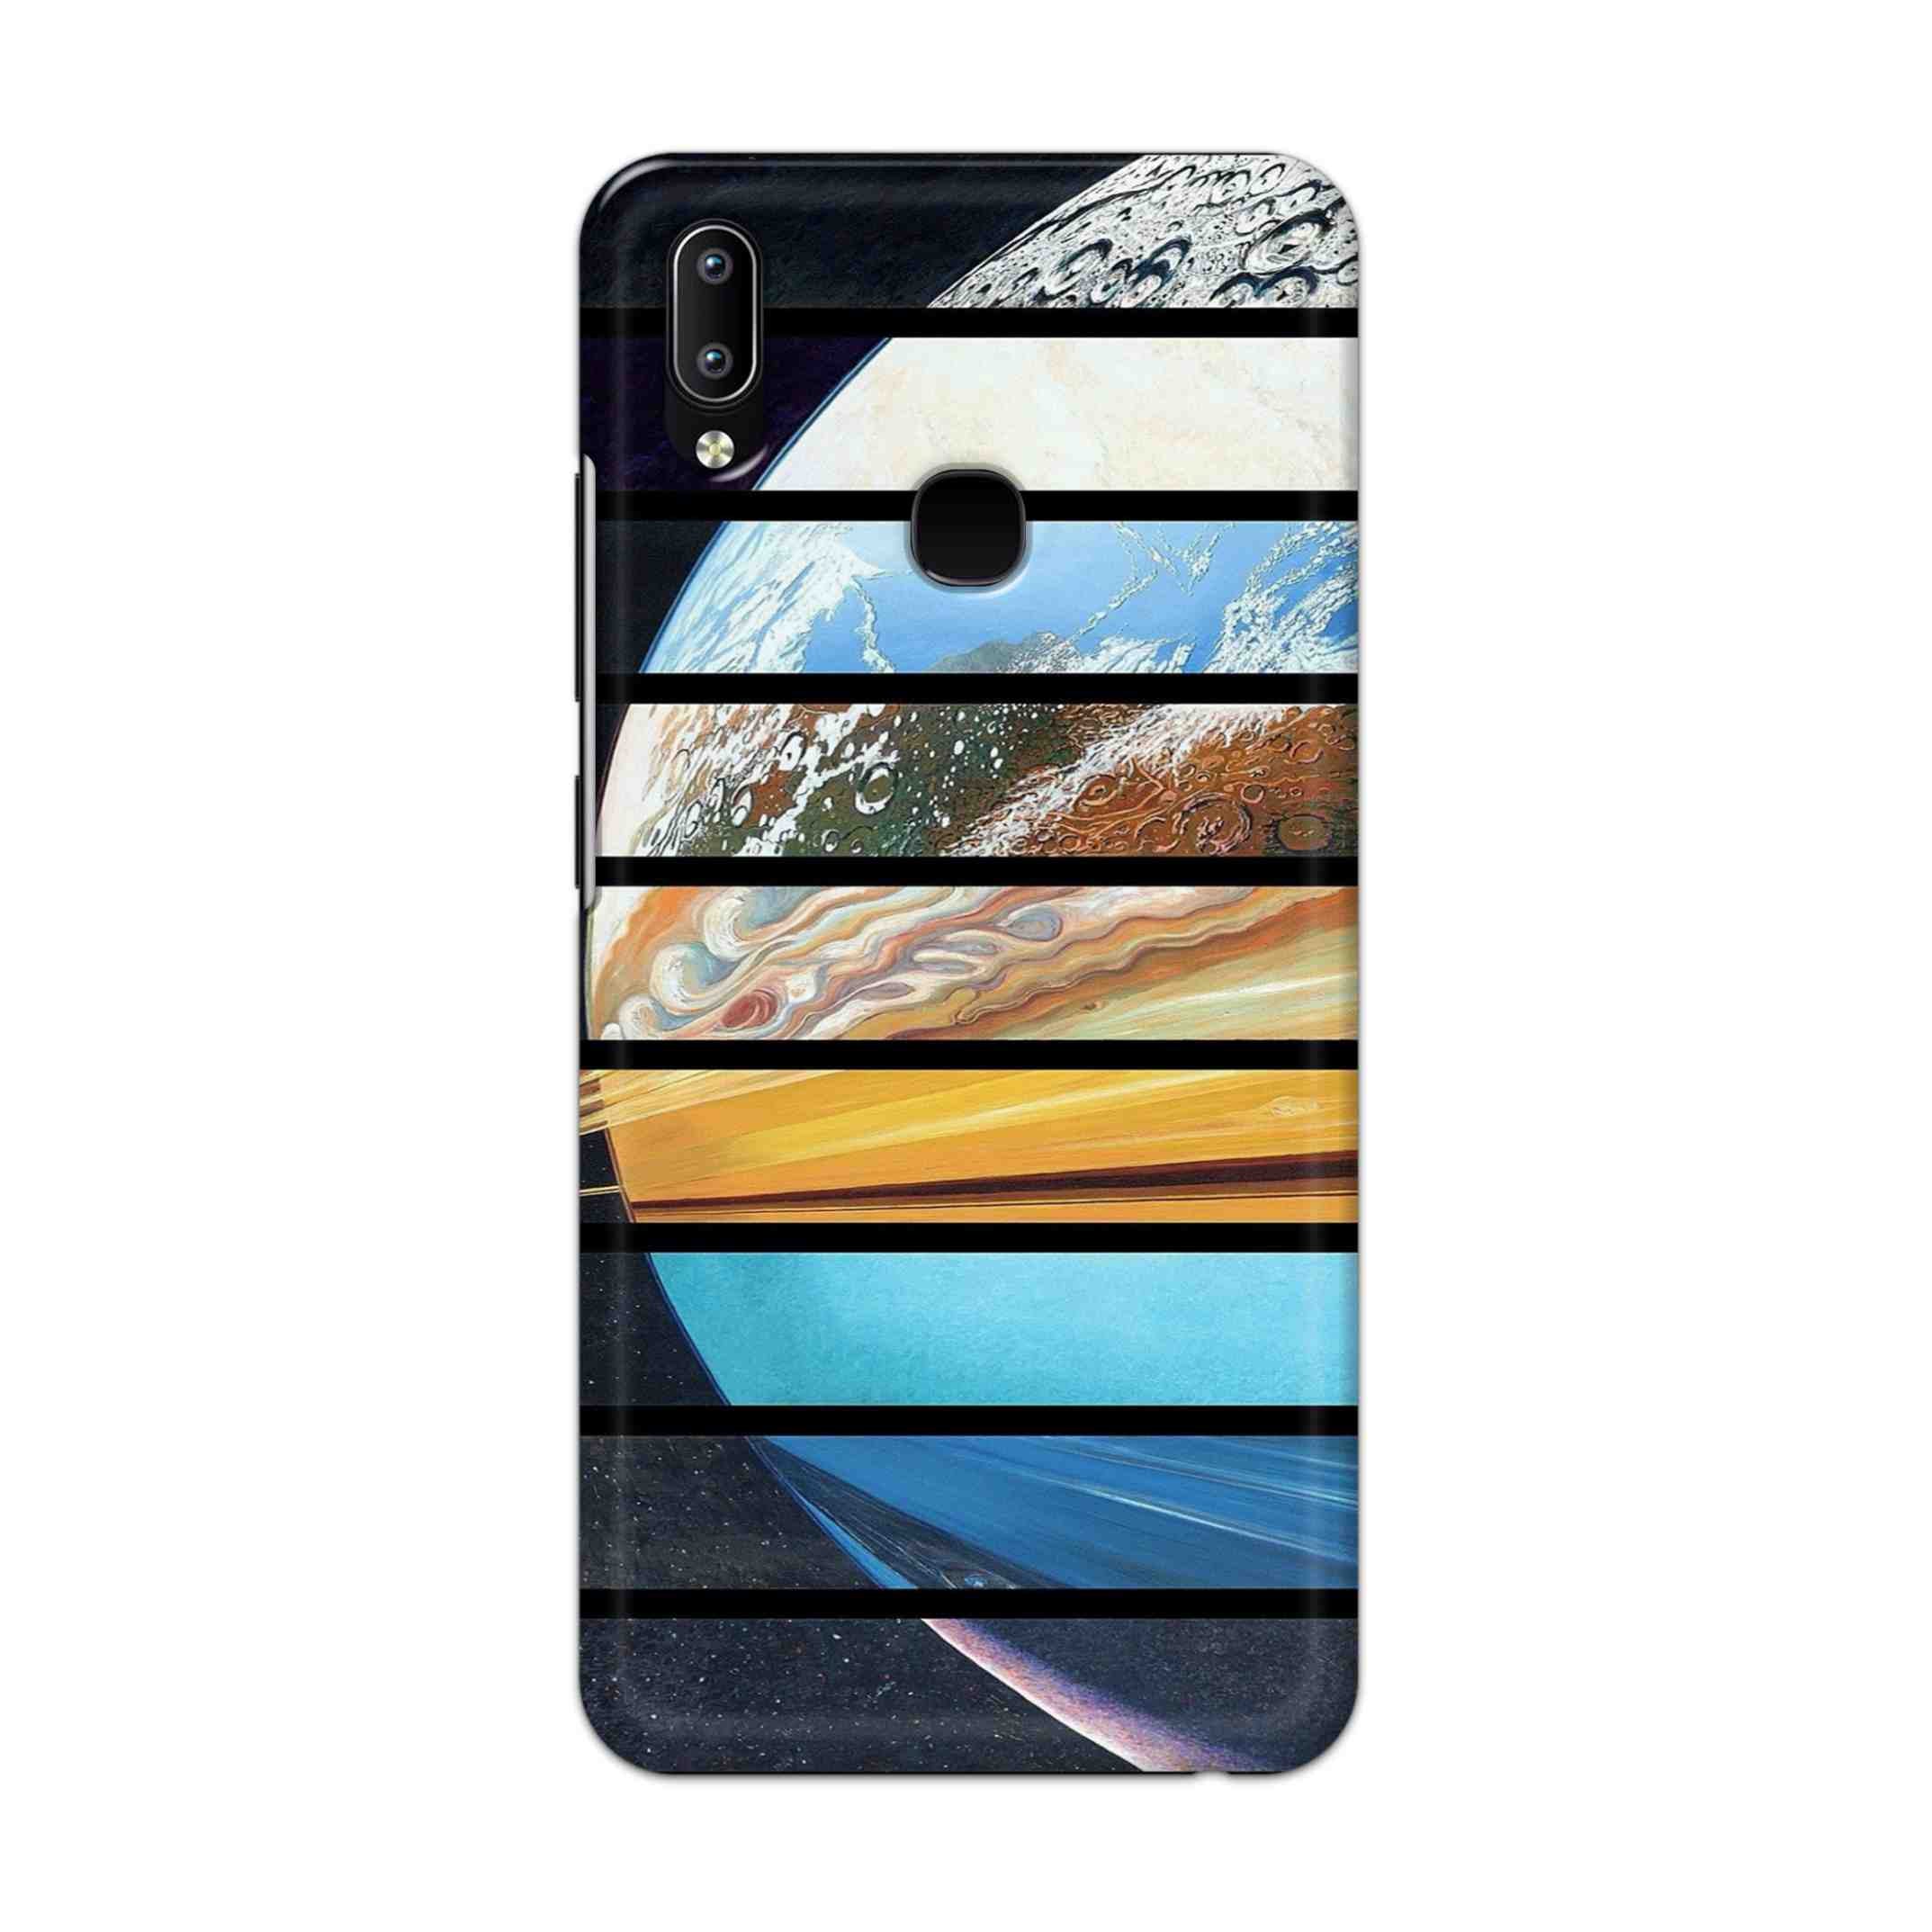 Buy Colourful Earth Hard Back Mobile Phone Case Cover For Vivo Y95 / Y93 / Y91 Online